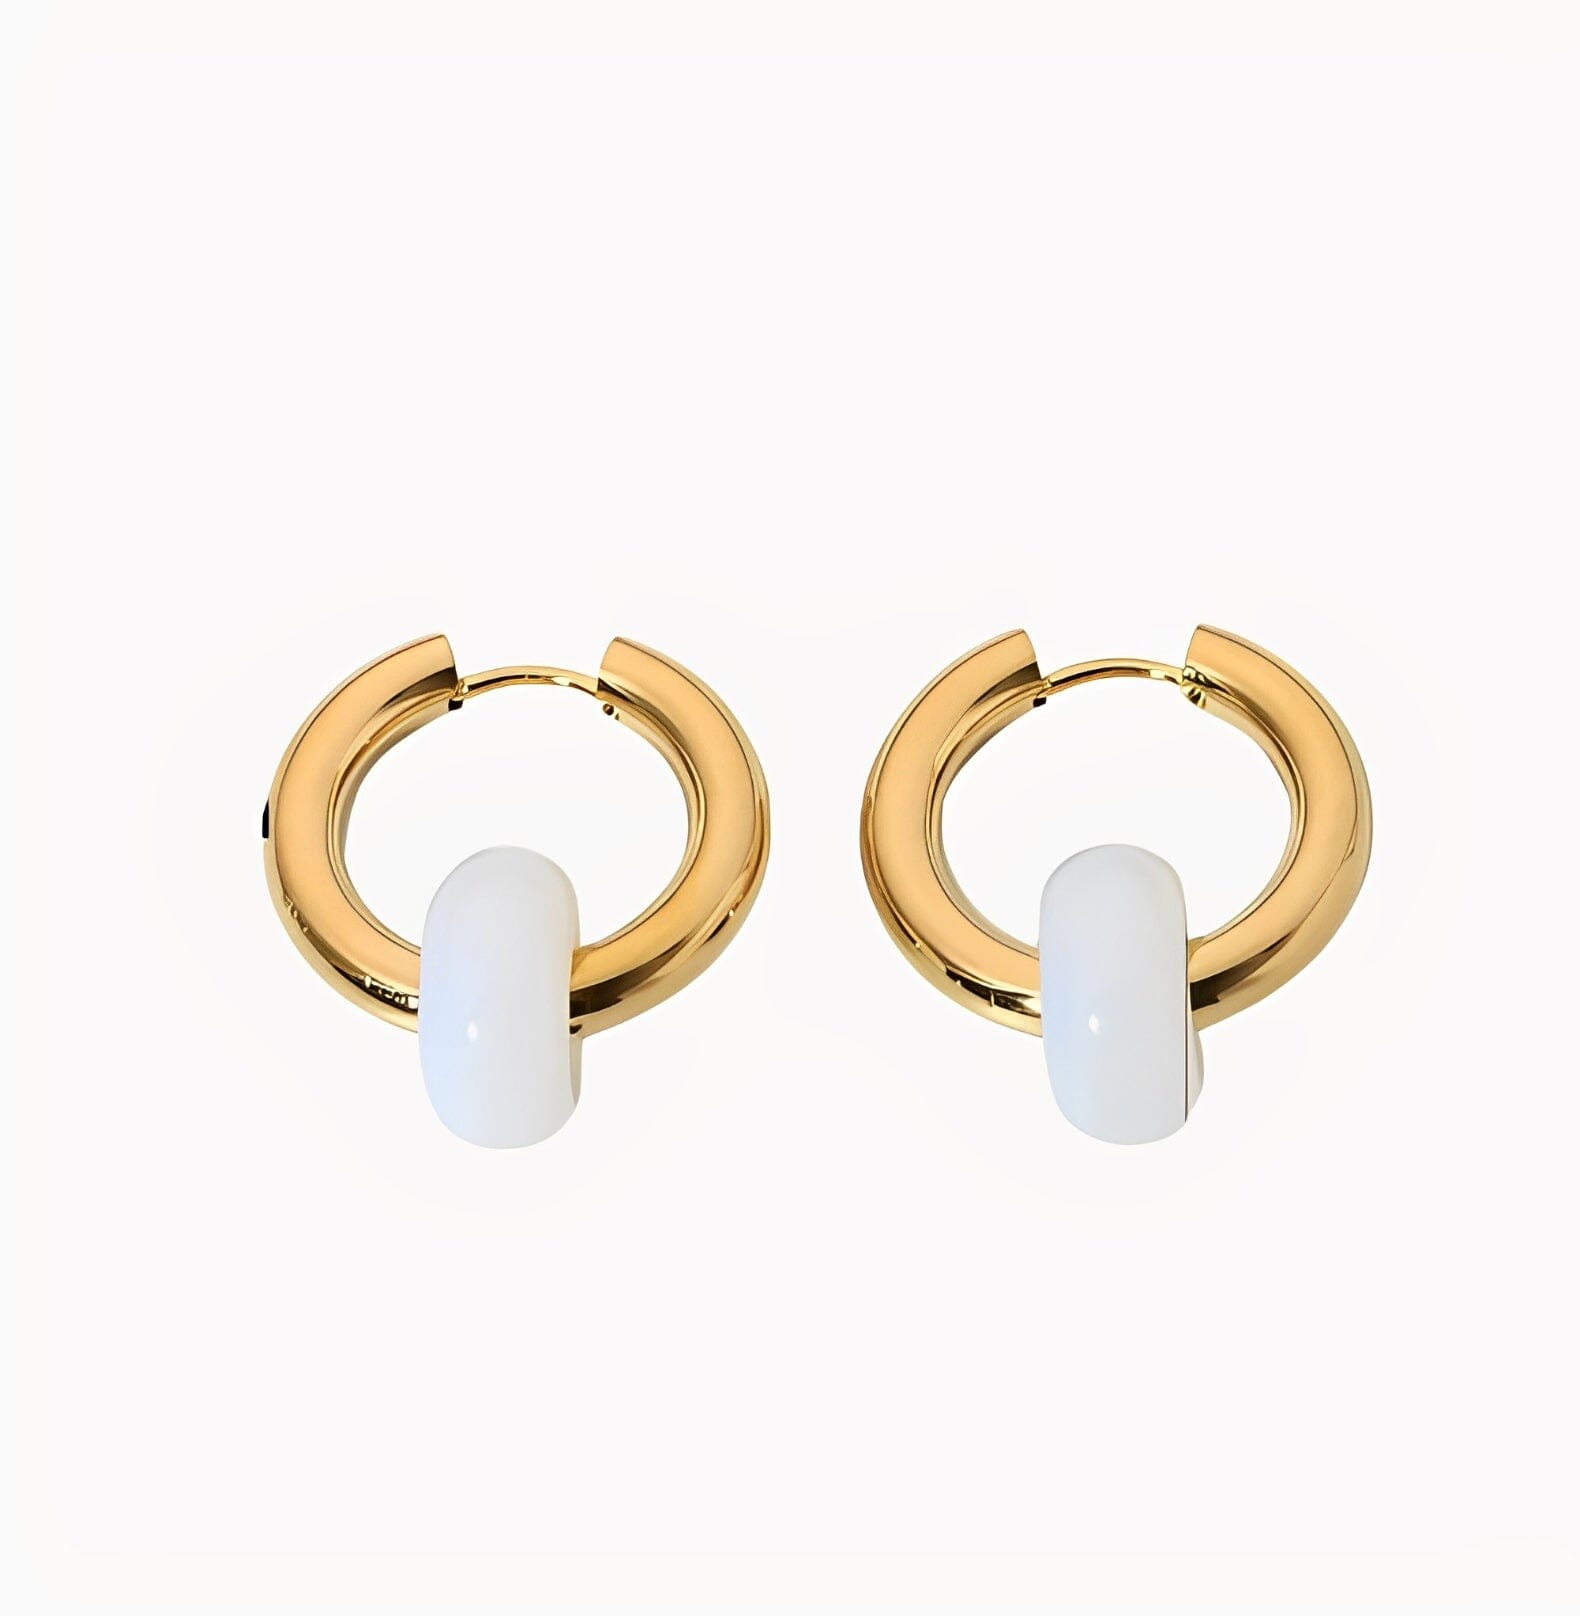 NATURAL STONE HOOPS EARRINGS earing Yubama Jewelry Online Store - The Elegant Designs of Gold and Silver ! 